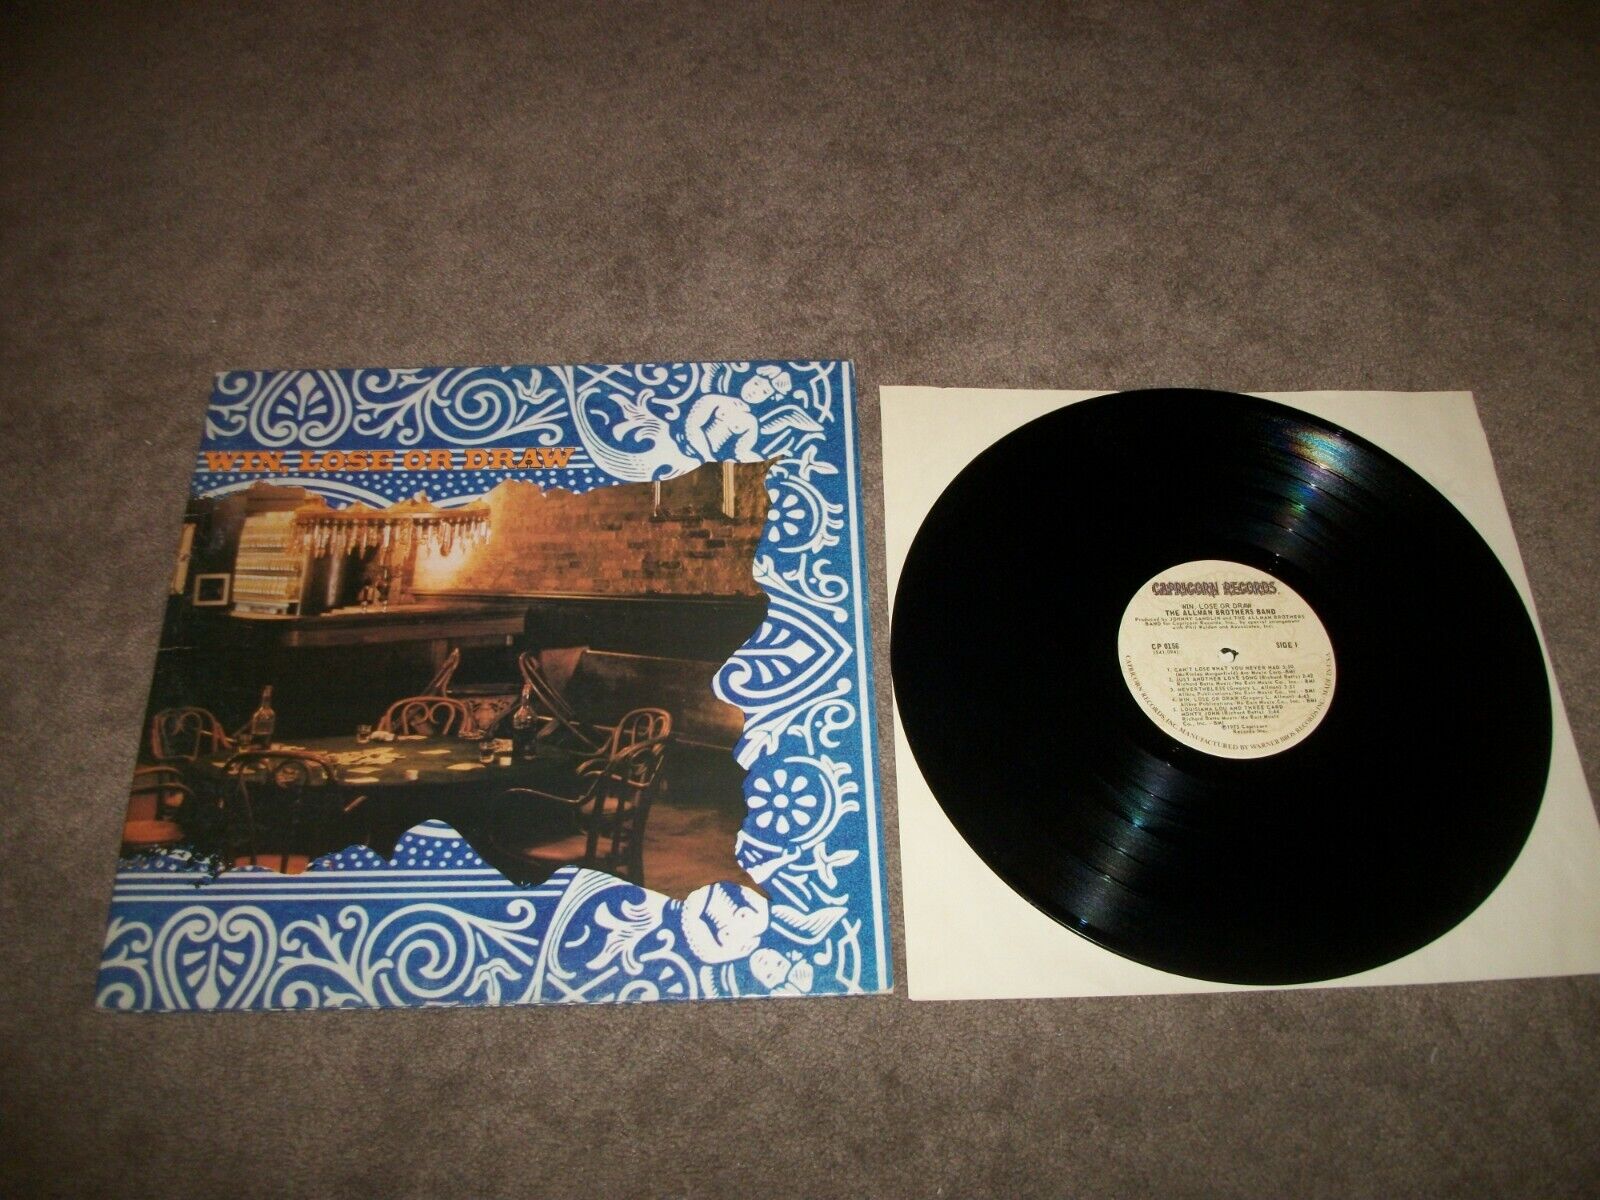 CP 0156 1st Pressing Allman Brothers Win Lose Draw LP - STERLING - EX VINYL